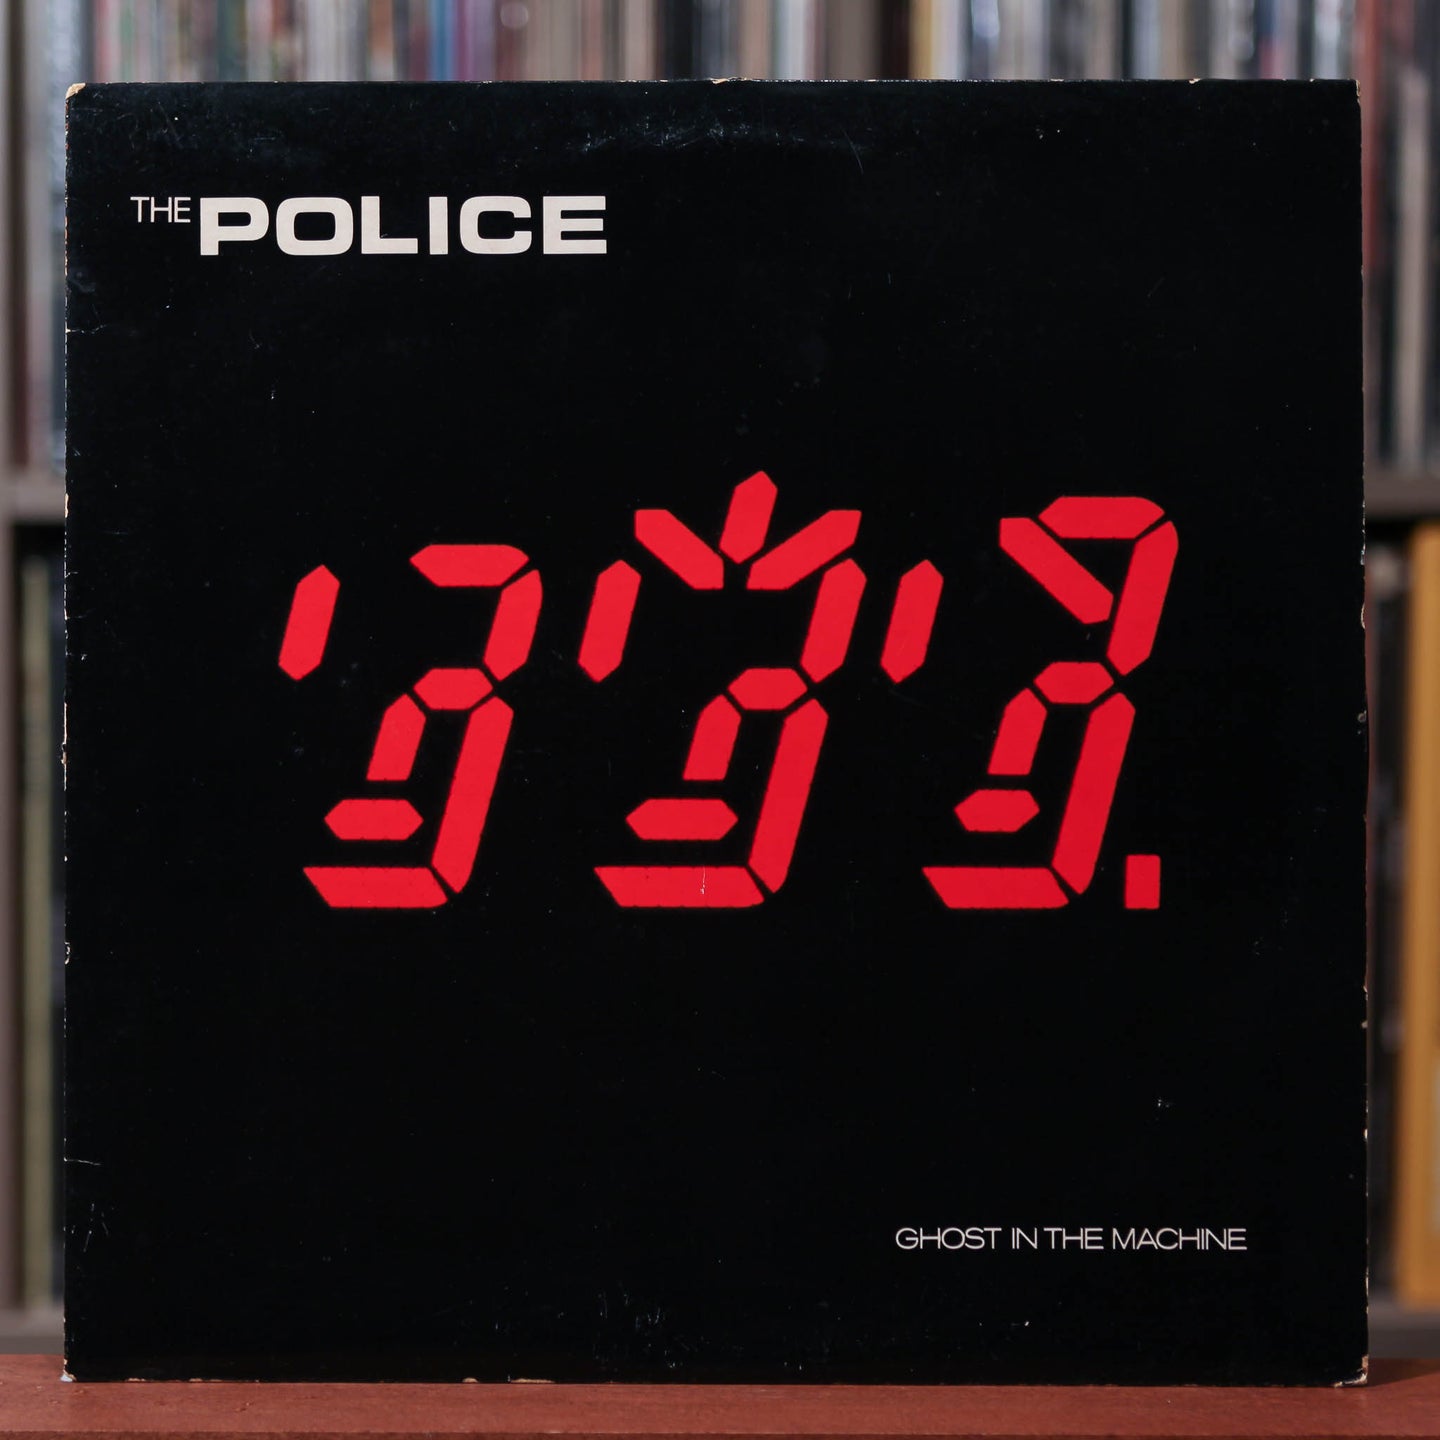 Police - Ghost In The Machine - 1981 A&M, VG/VG+